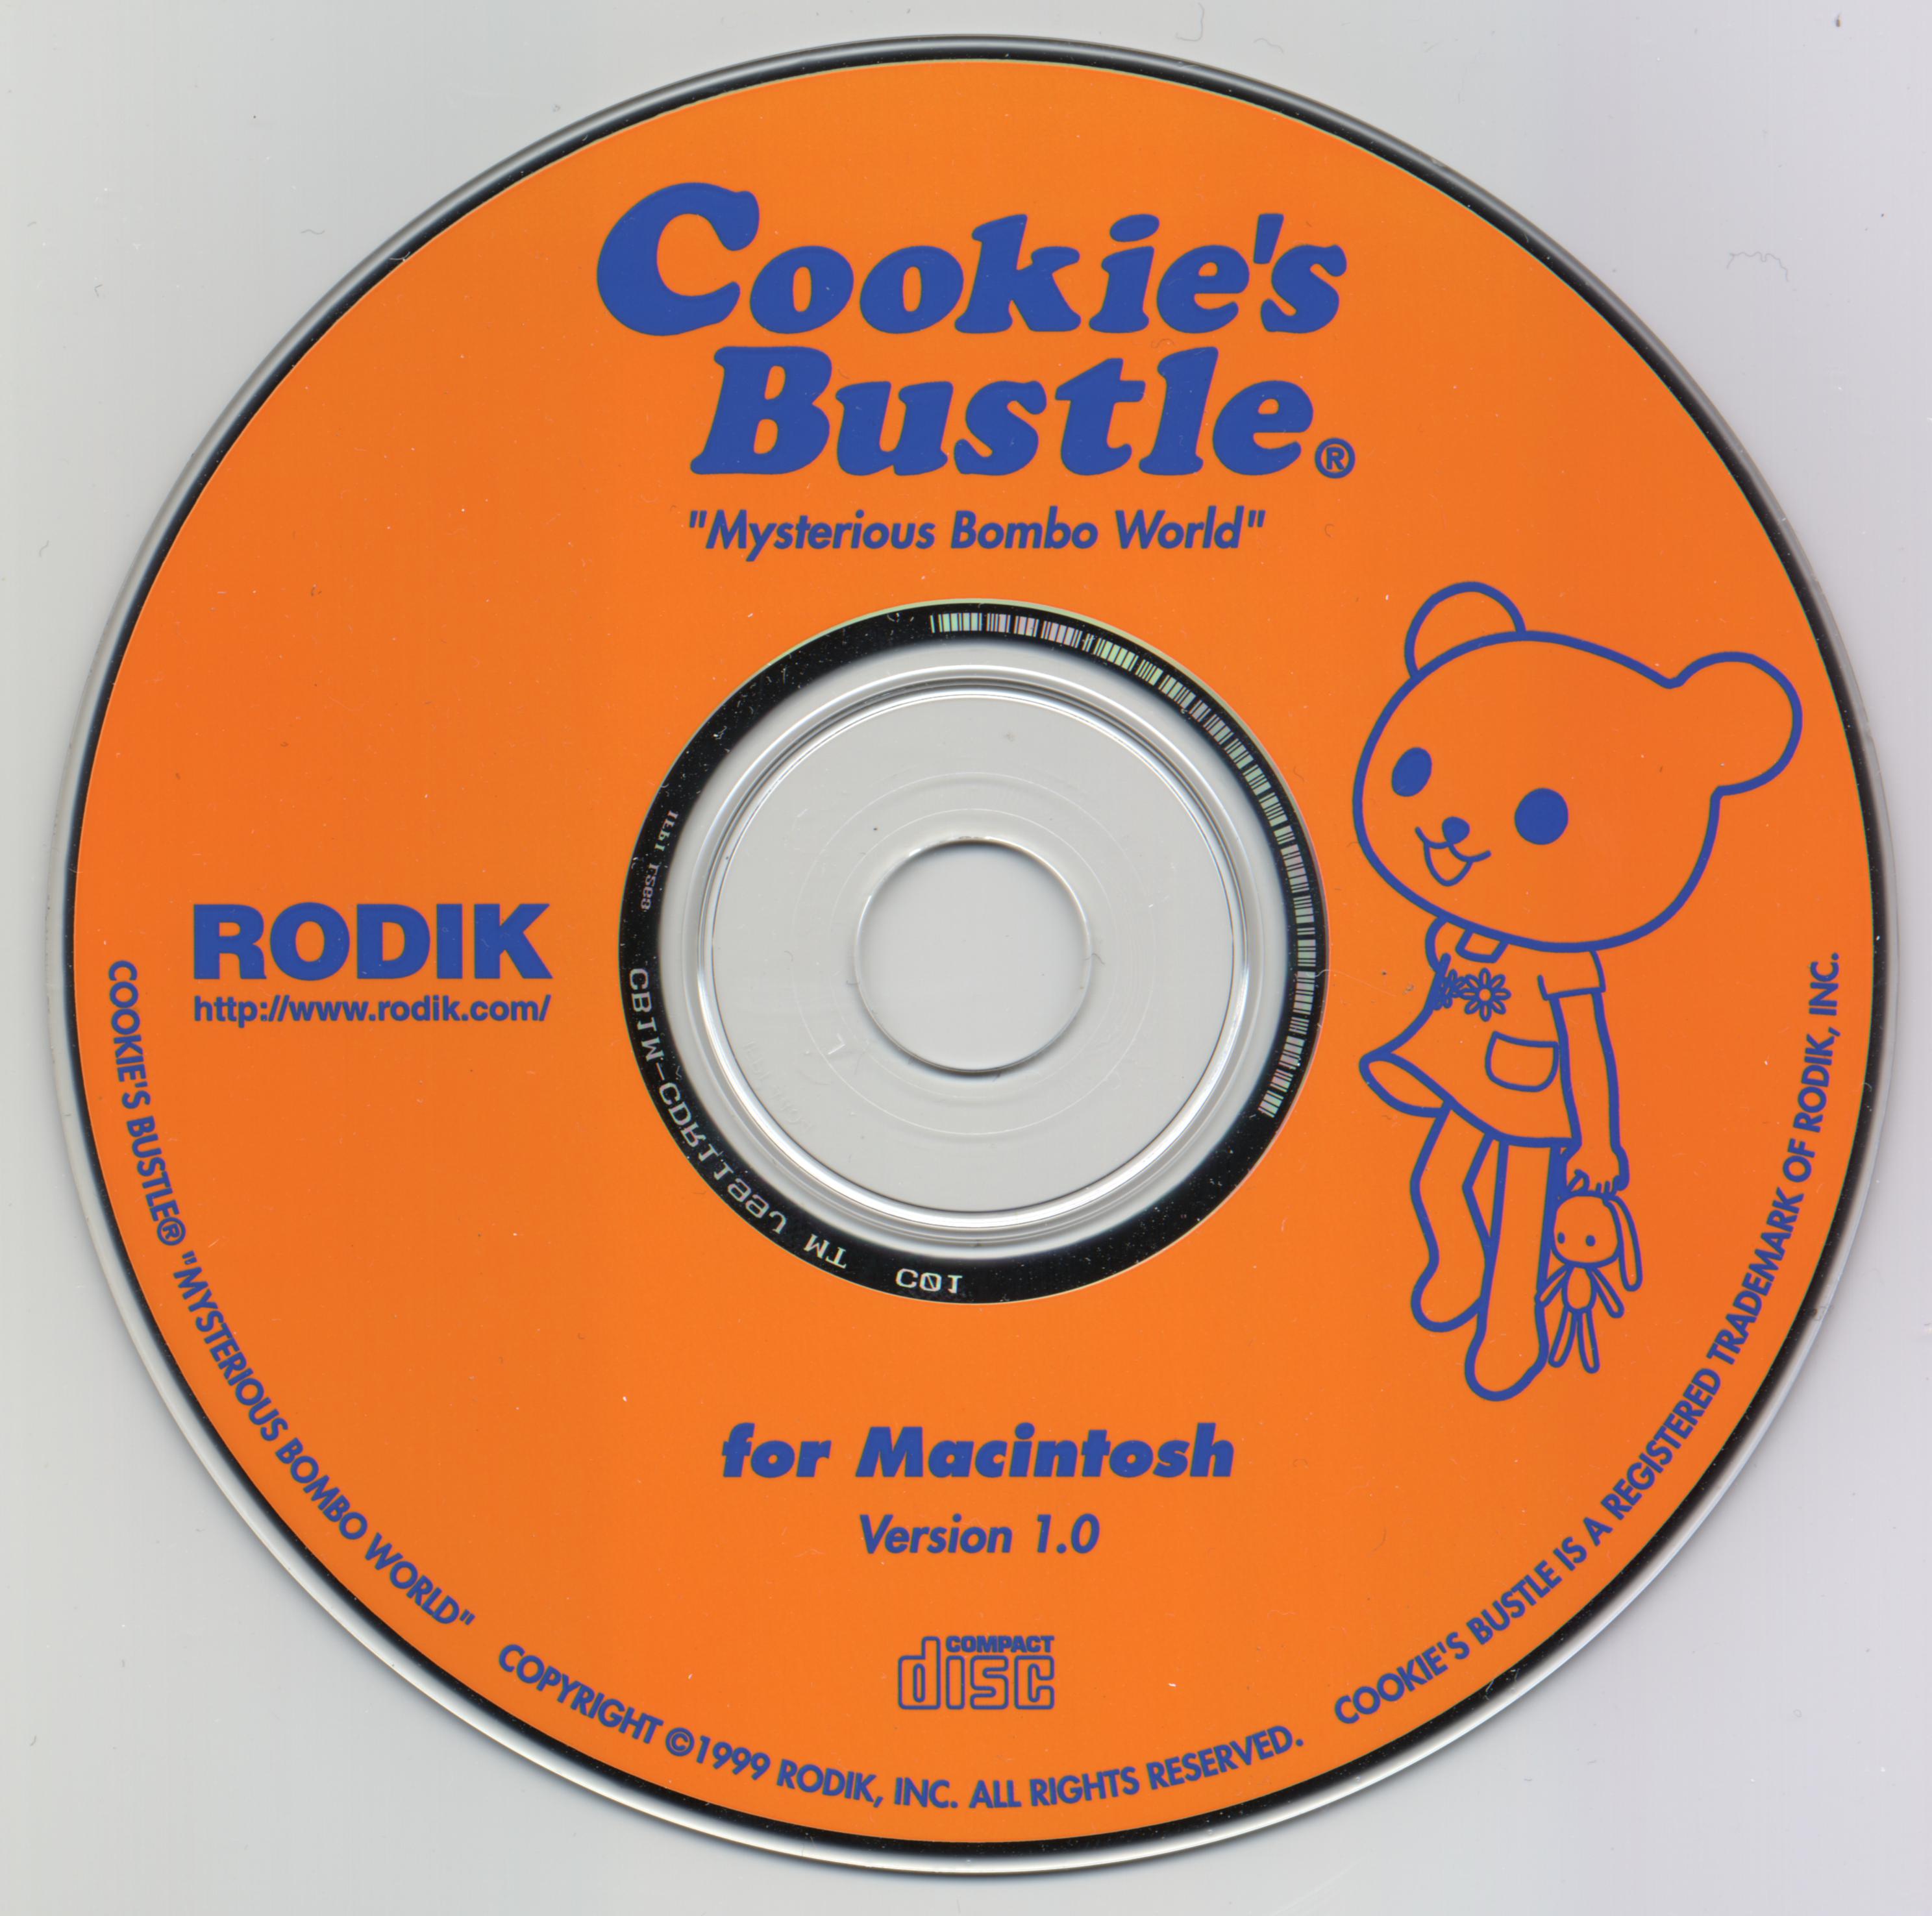 An image of the Cookie's Bustle disc.  It's an orange disc with blue text & lines.  At the top it reads 'Cookie's Bustle,' with the subtitle 'Mysterious Bombo World.'  To the right is Cookie, a lineart version of the same render from the 'Starring Cookie Blair!' image.  To the left is the Rodik logo and a link to their website.  Below the hole in the middle of the disc, it reads 'For Macintosh, version 1.0'.  Below that is the Compact Disc logo.  Copyright information is written along the bottom edge of the disc.